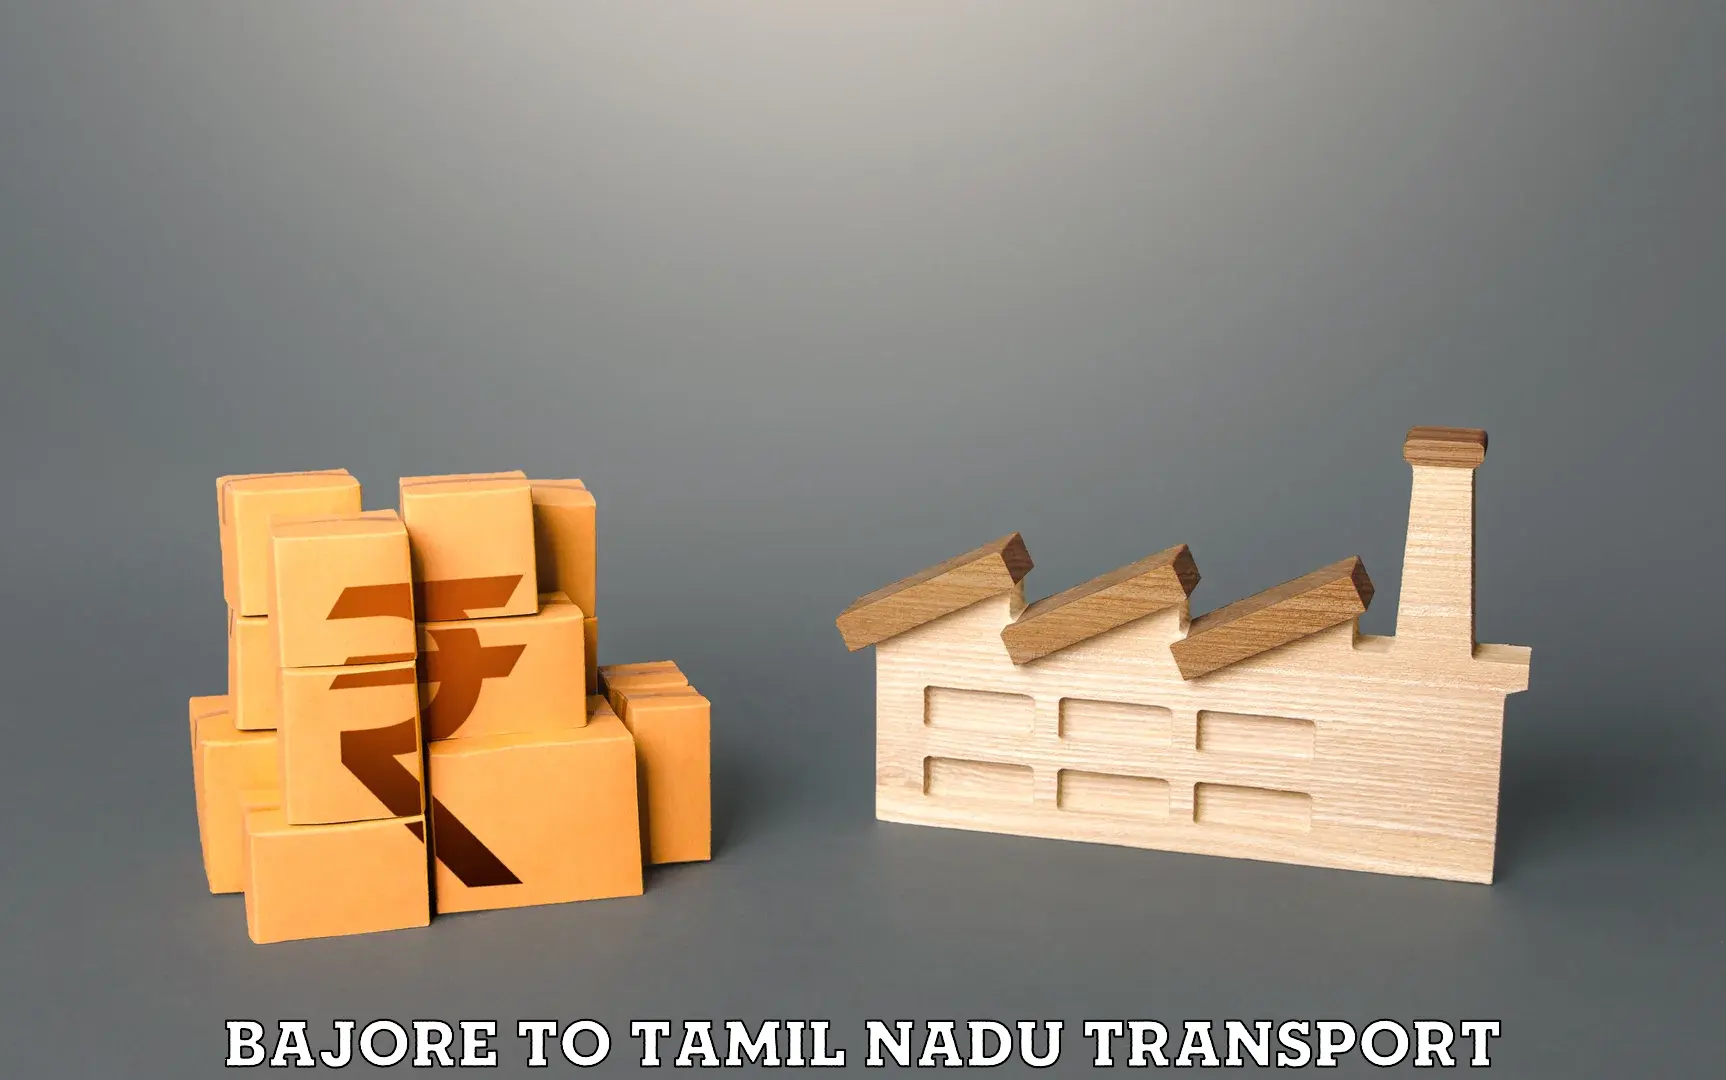 Pick up transport service Bajore to SRM Institute of Science and Technology Chennai